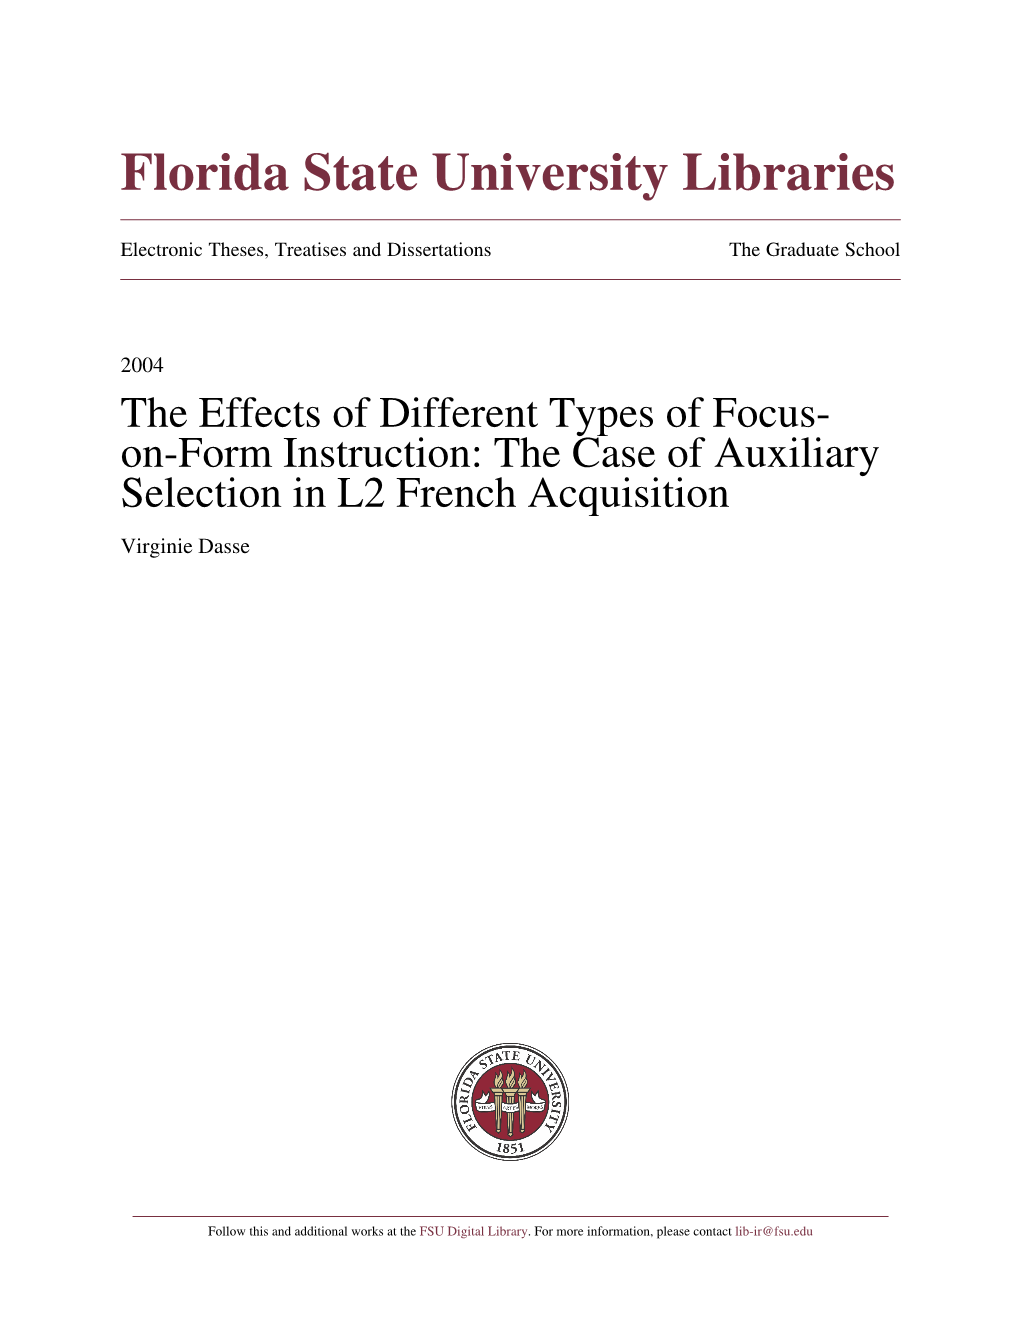 The Effects of Different Types of Focus-On-Form Instruction: the Case of Auxiliary Selection in L2 French Acquisition